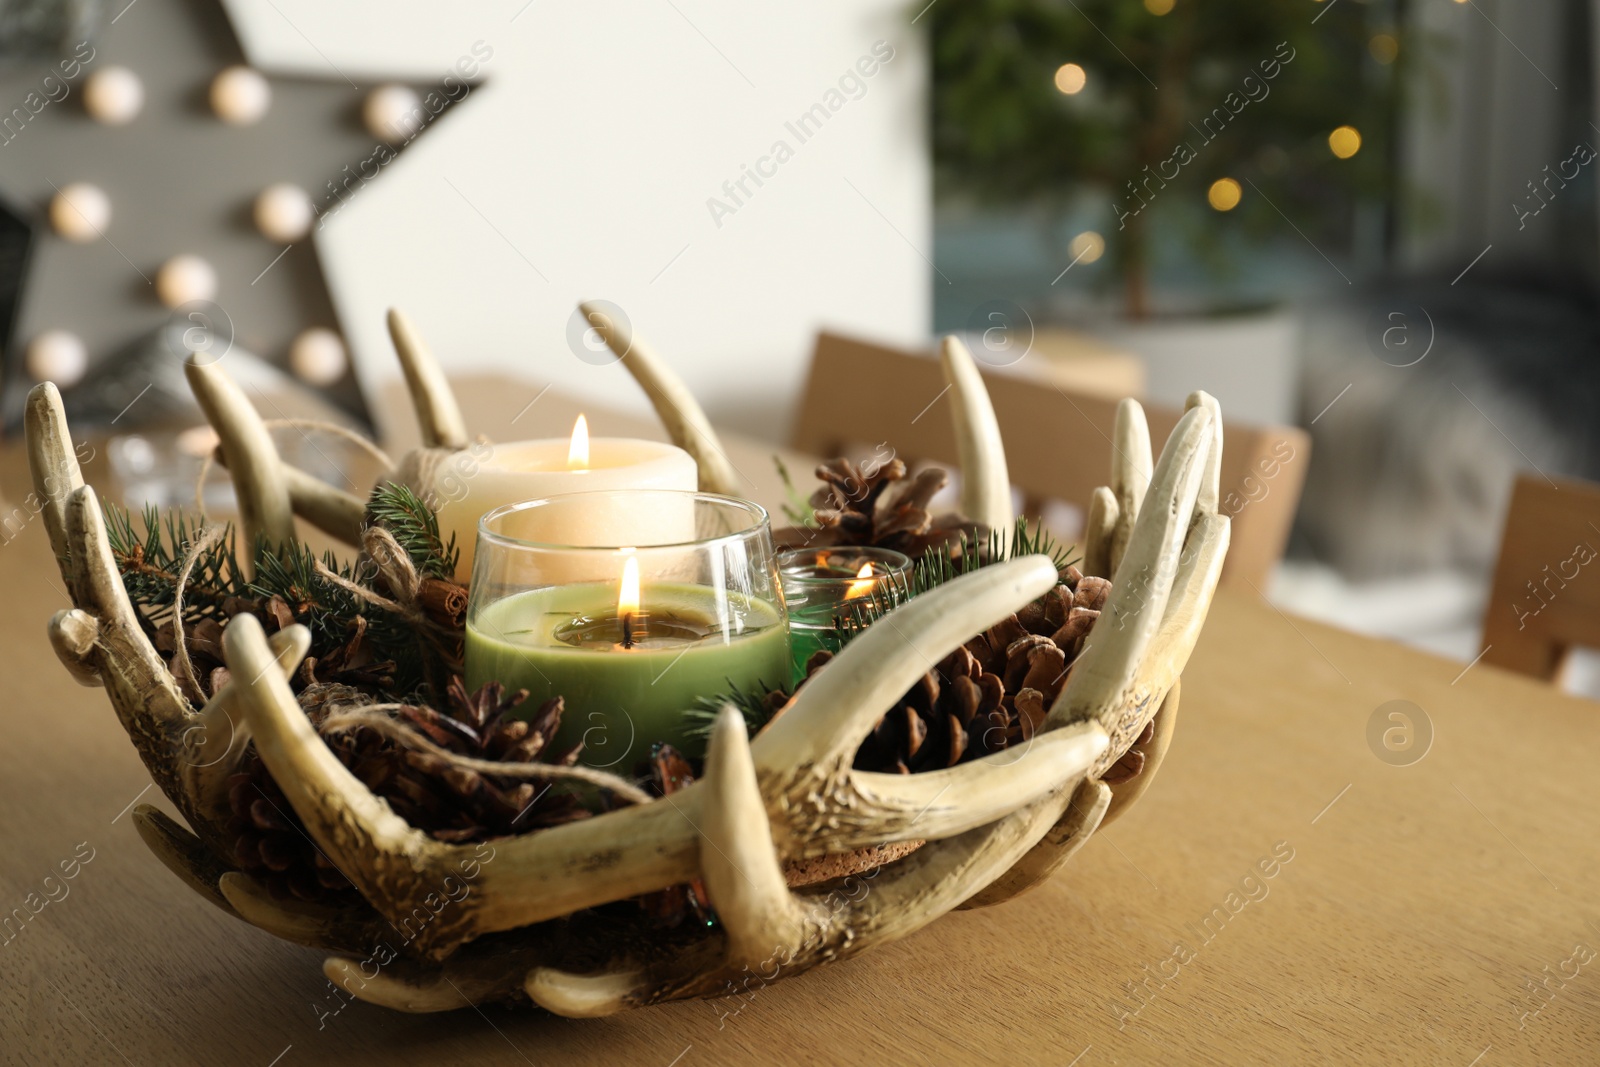 Photo of Burning scented conifer candles with Christmas decor  on wooden table indoors